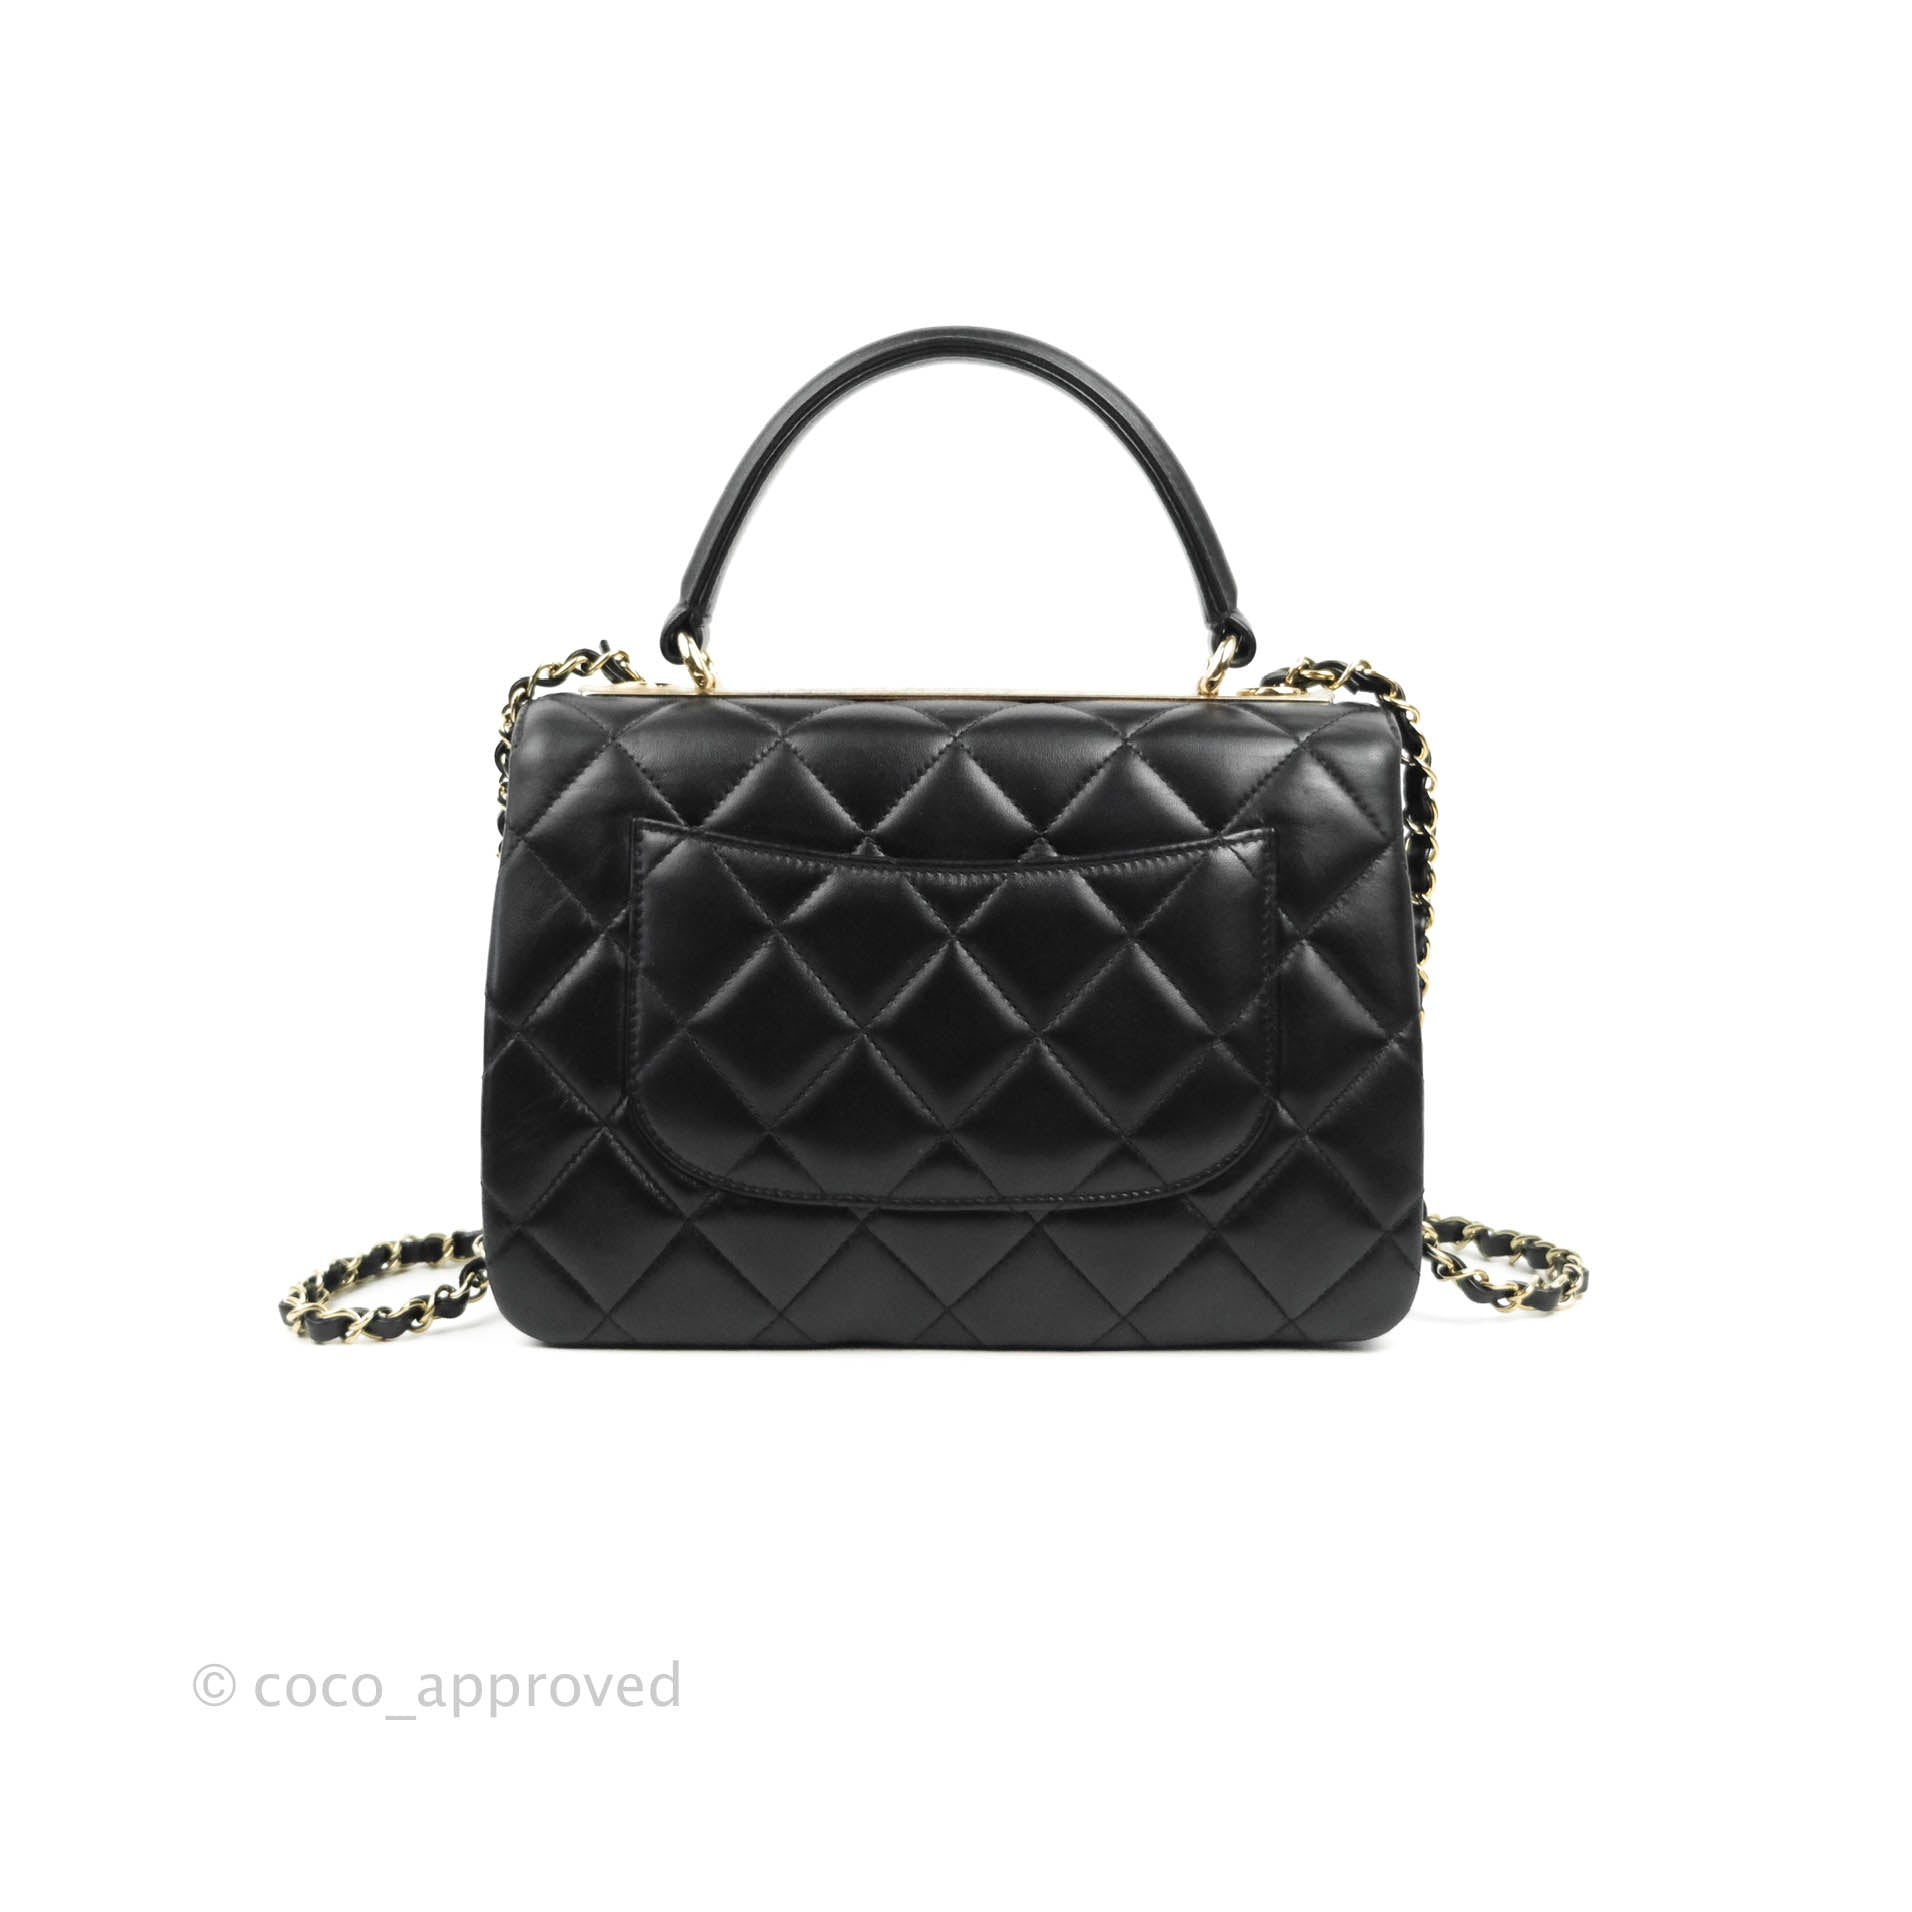 CHANEL Lambskin Quilted Small Trendy CC Flap Dual Handle Bag Grey 1149008